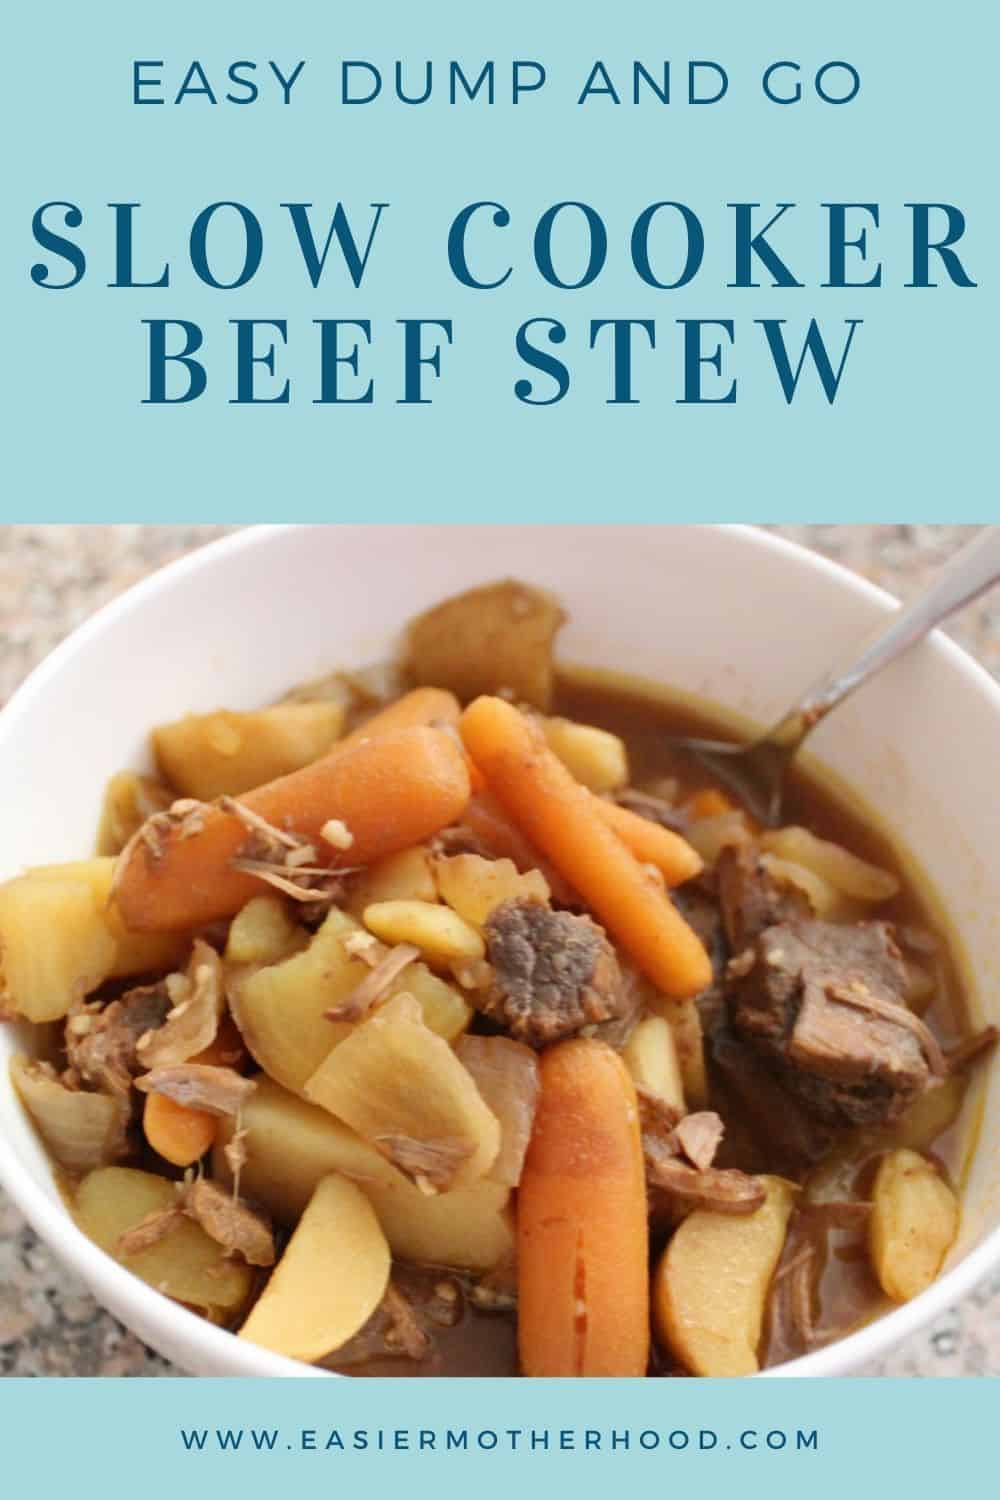 Pinterest pin showing bowl of finished easy slow cooker beef stew